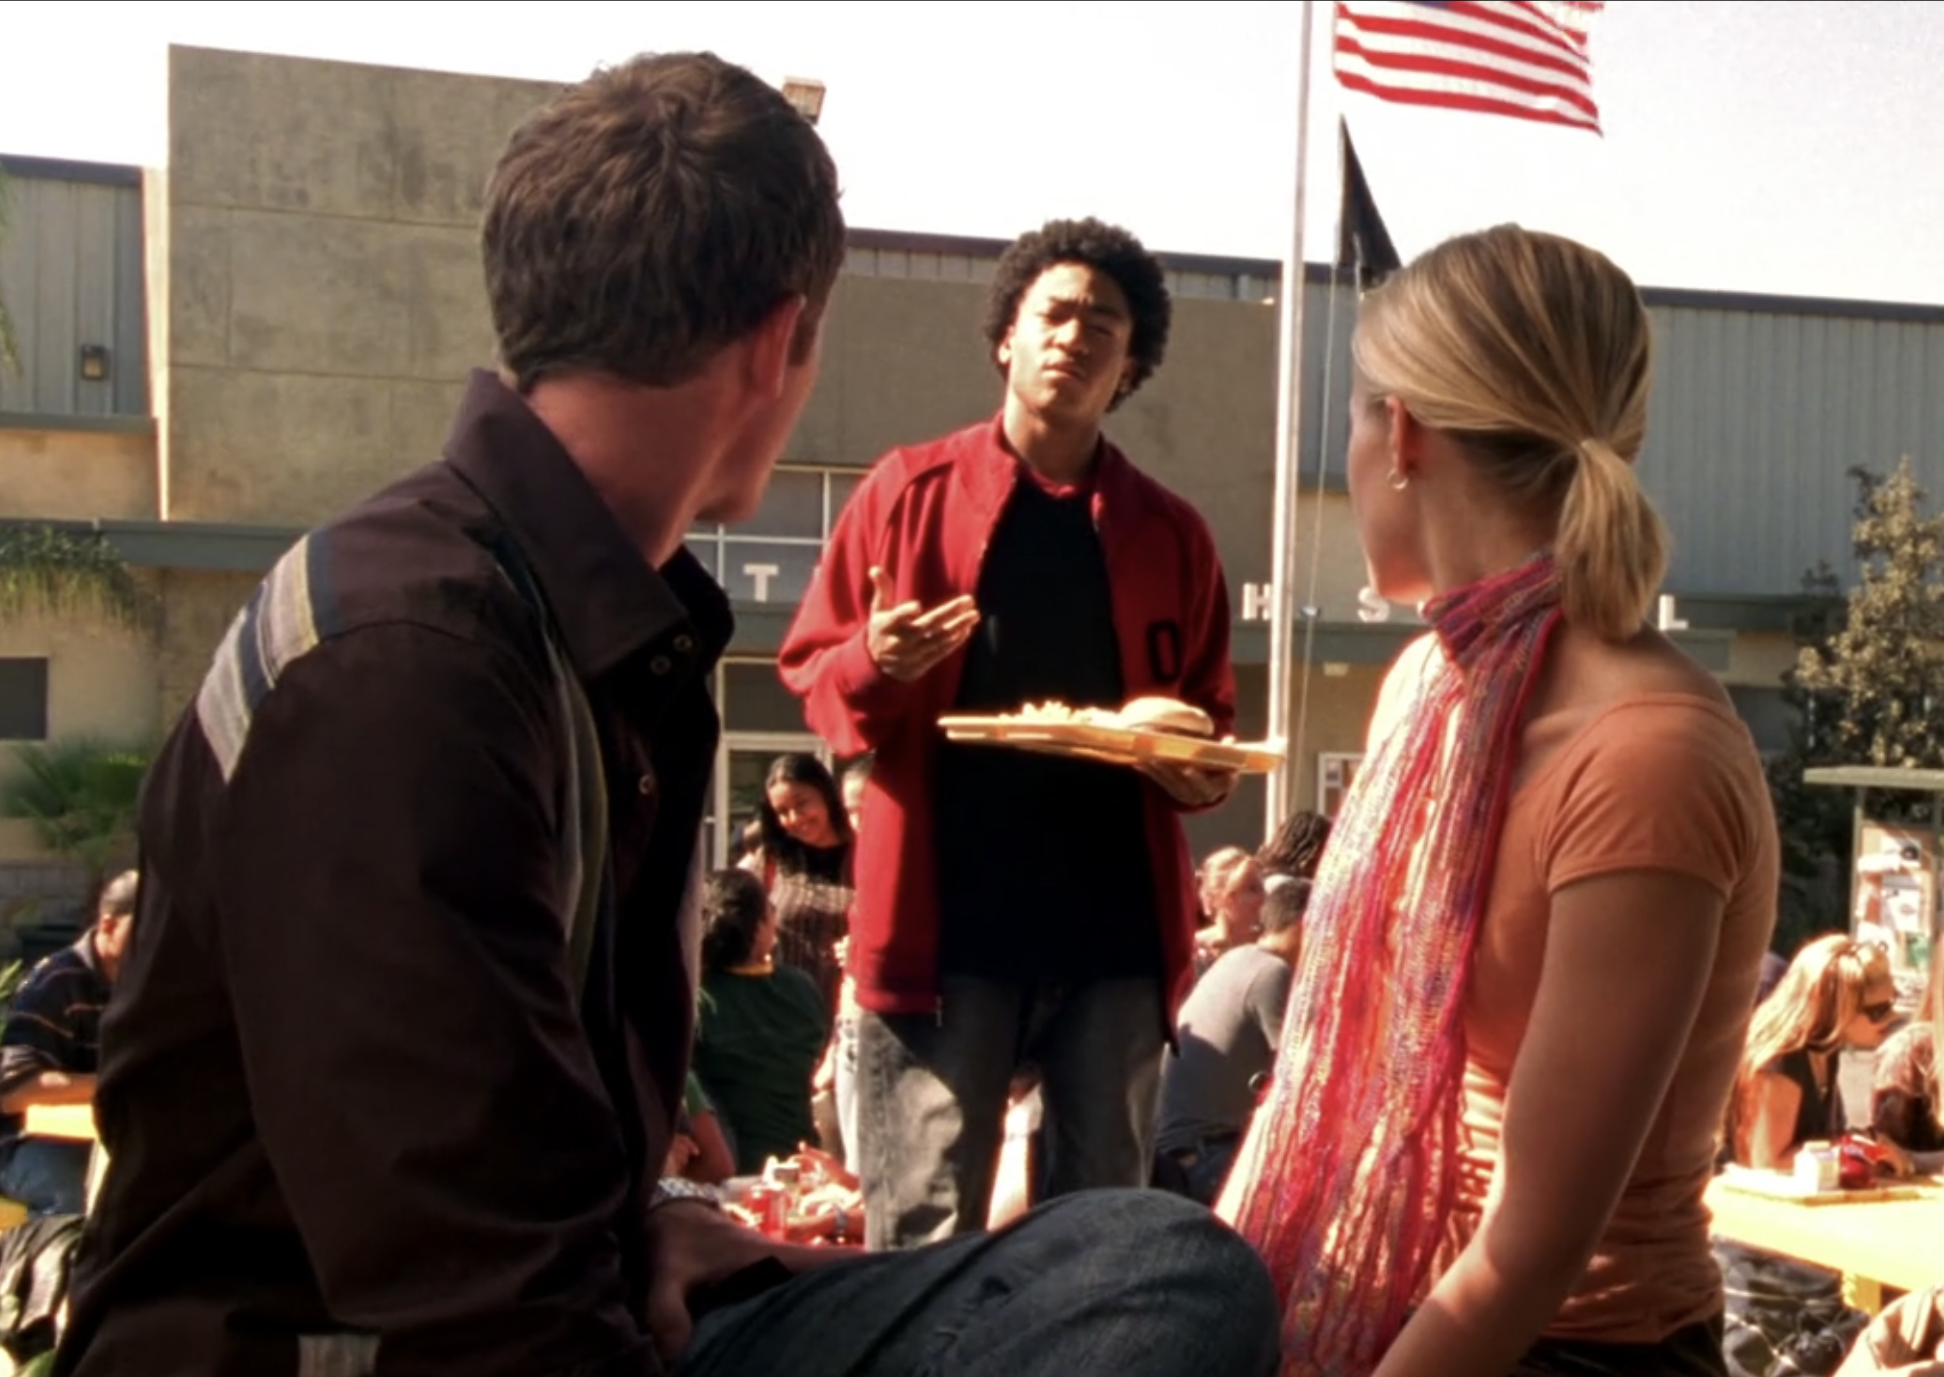 A screenshot from S1E5 of Veronica Mars. Wallace is in the background in a red jacket holding a lunch tray talking to Troy and Veronica who are in the foreground seated next to each other and looking behind them at Wallce.